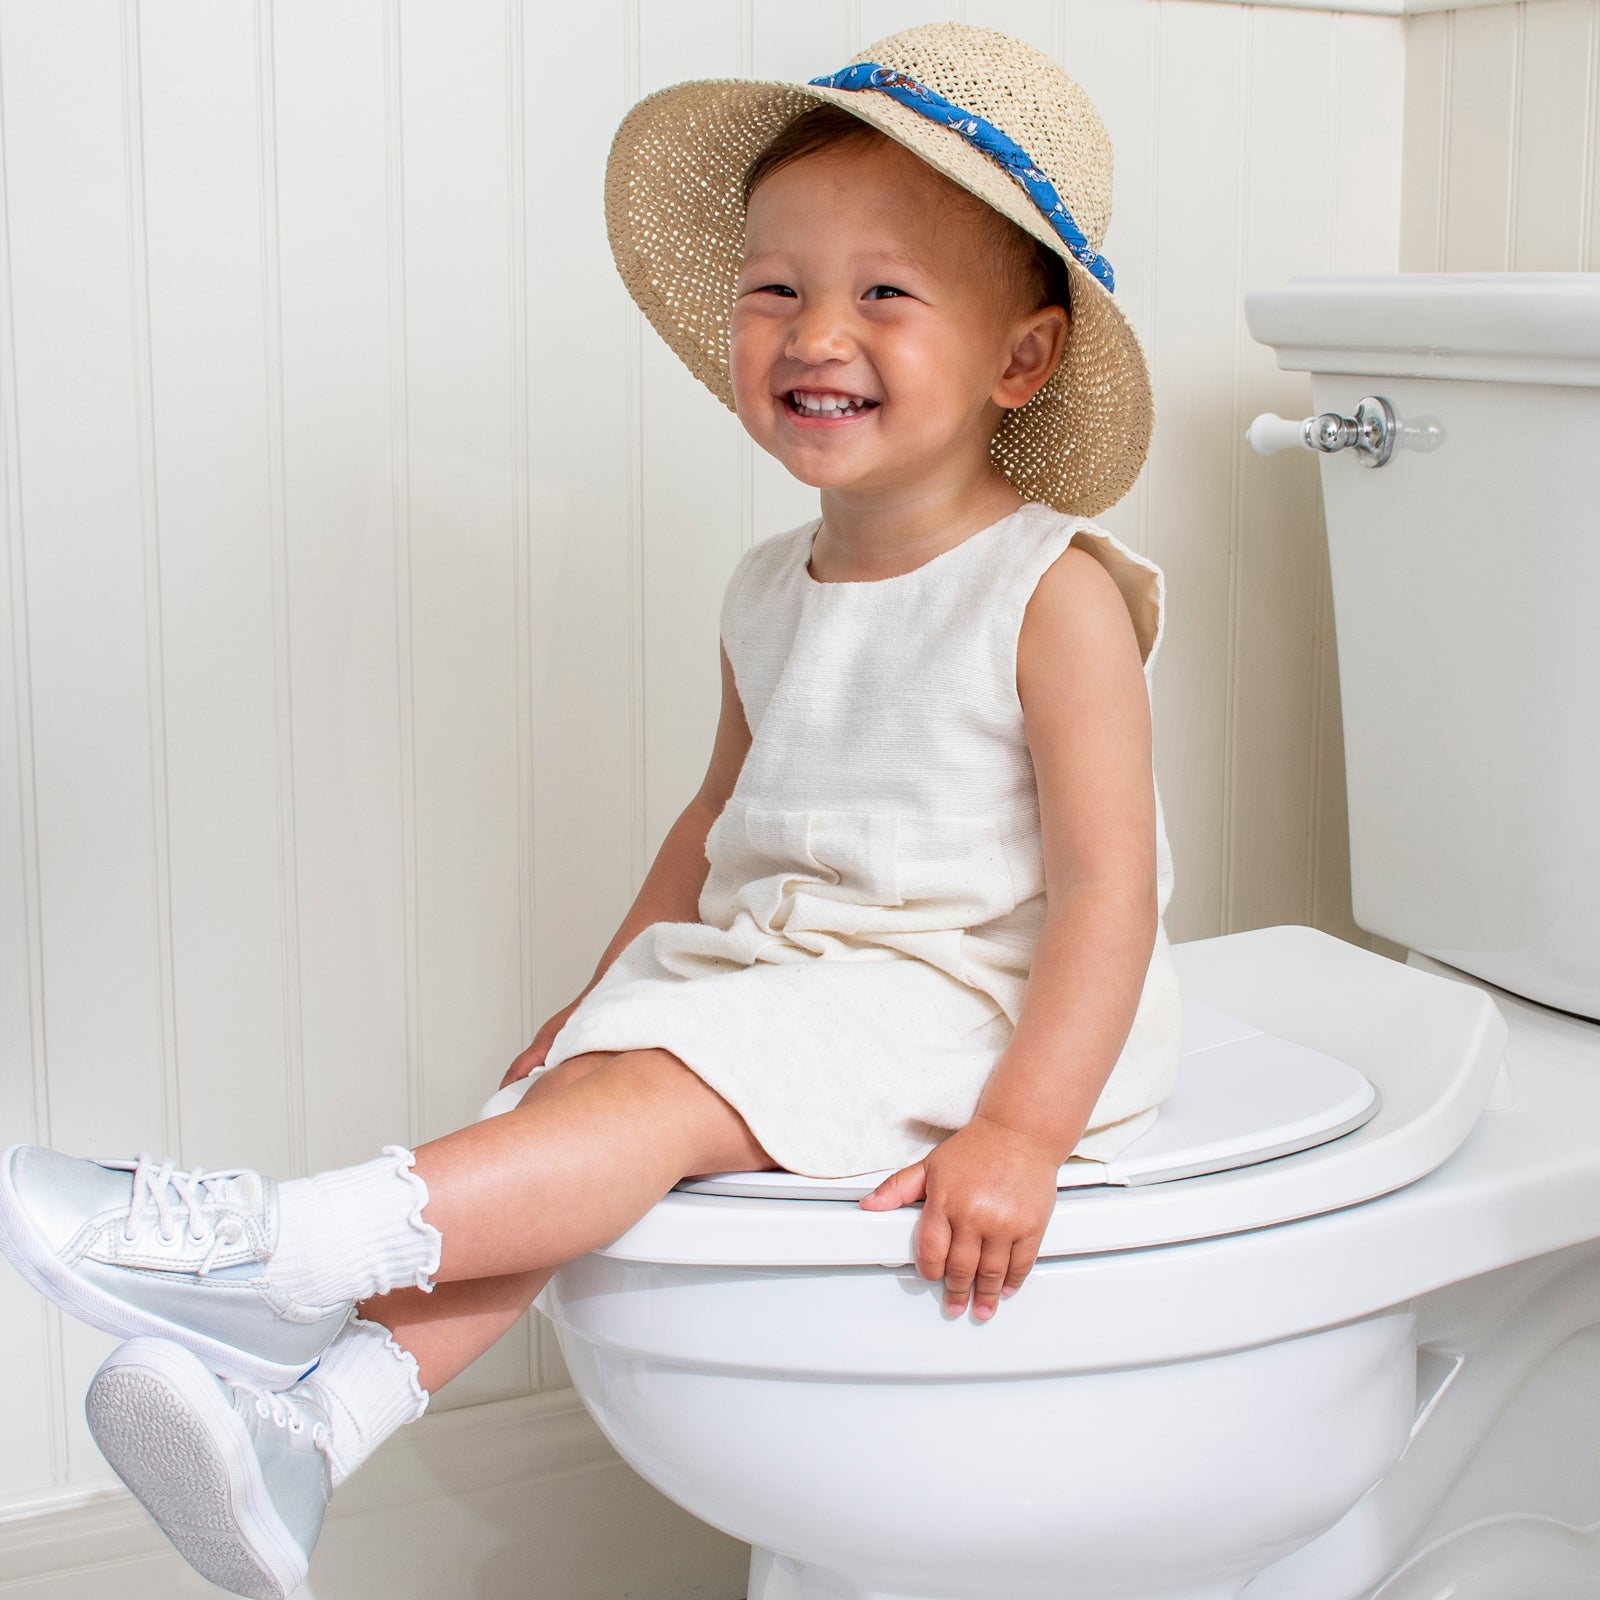 Portable Potty for Toddlers' Potty Training